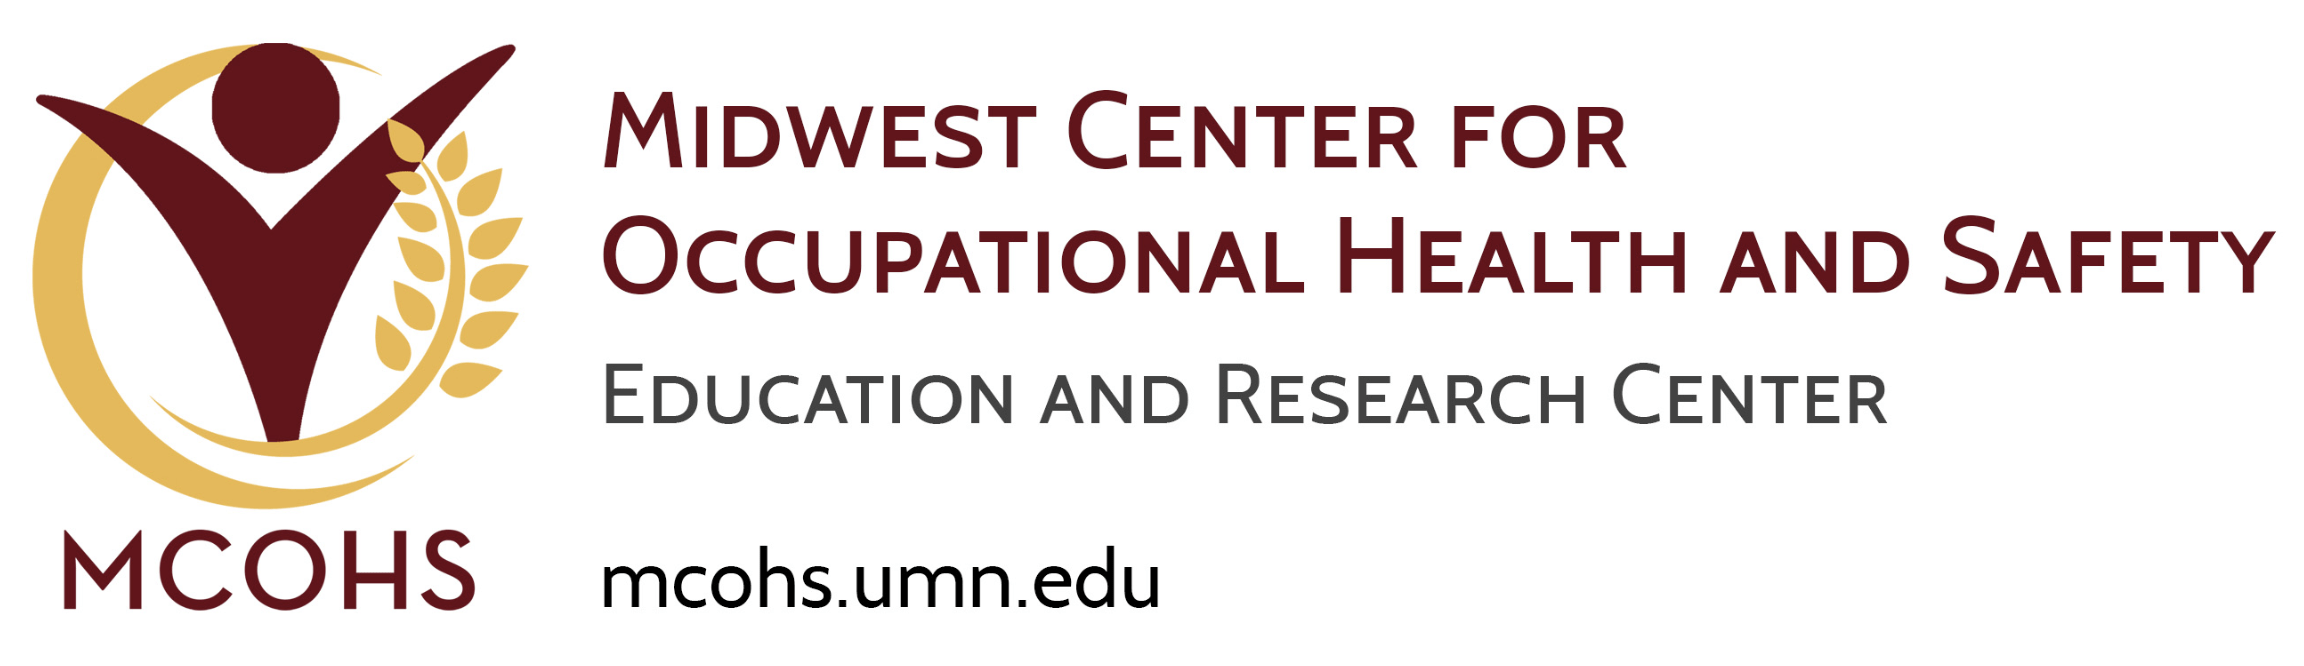 Midwest Center for Occupational Health and Safety education and research center logo